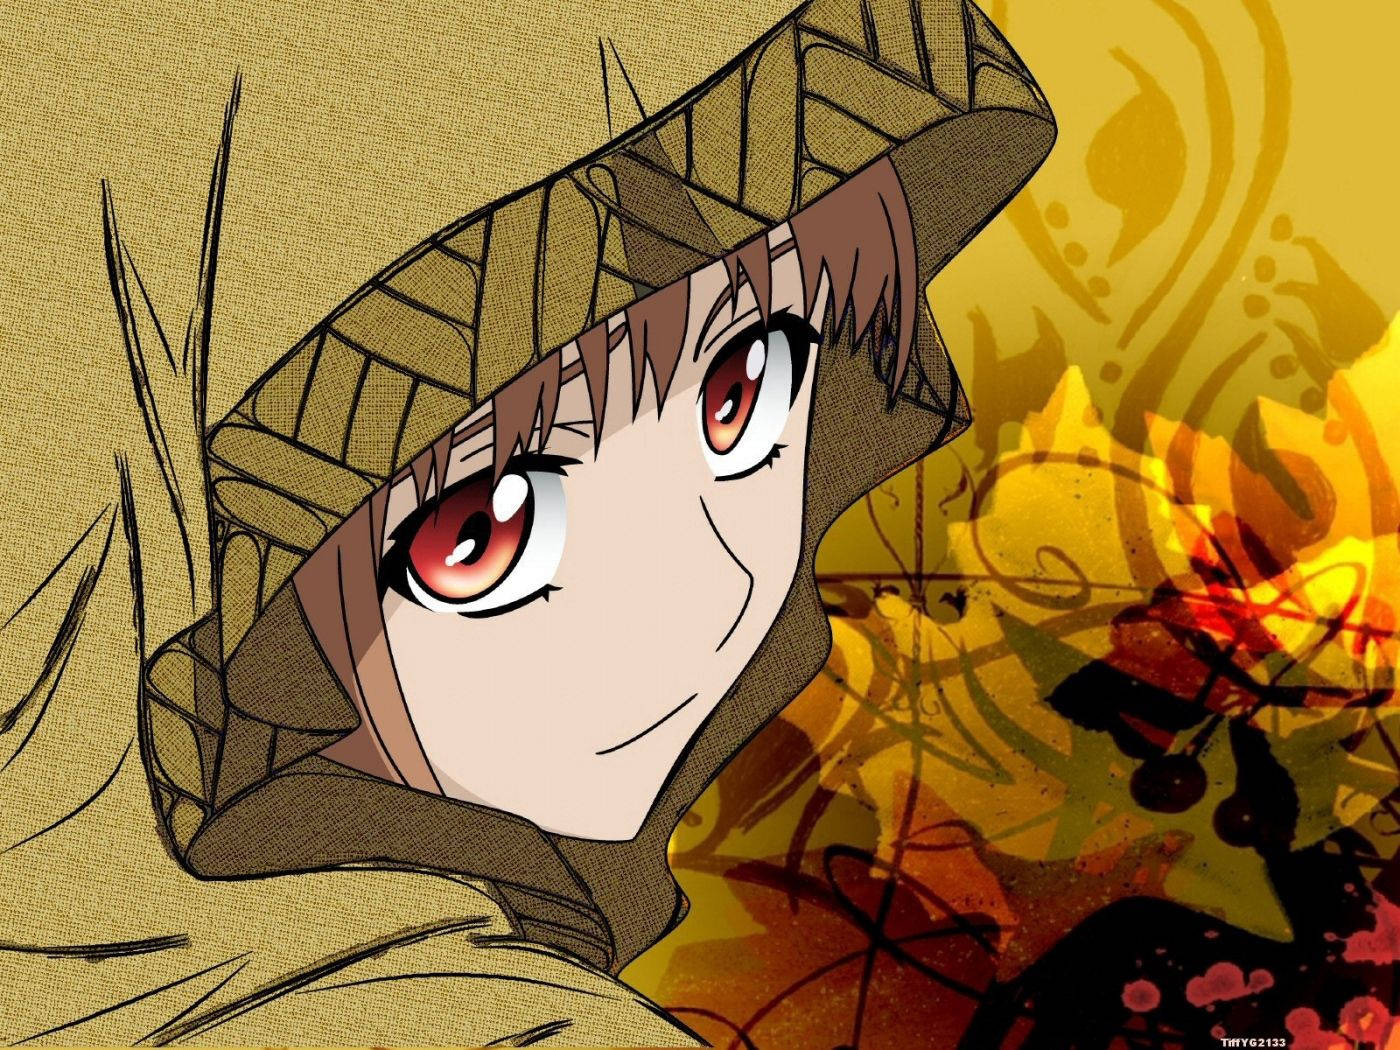 Anime girl wearing a brown cloak in a vintage surface wallpaper